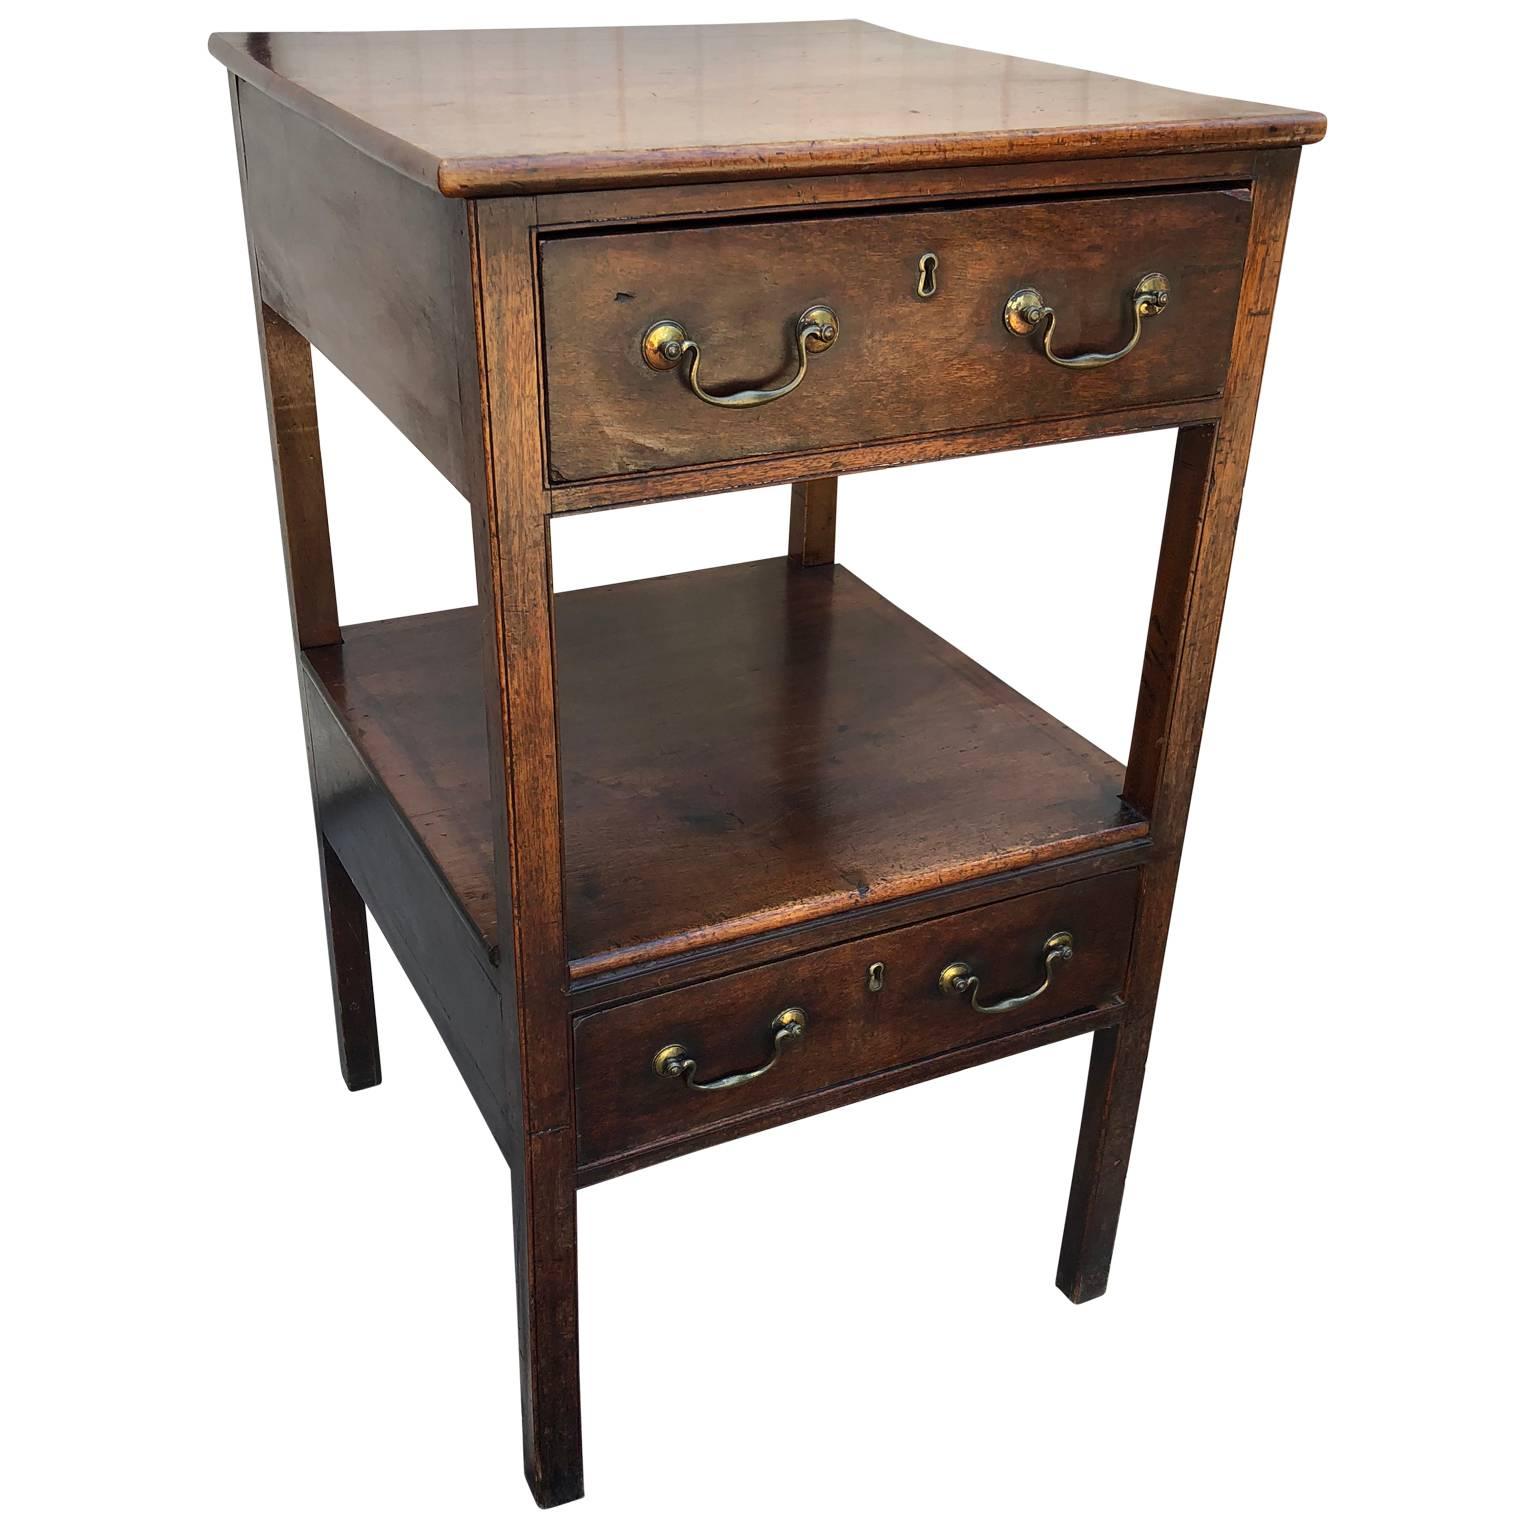 Tall two-drawer desk or chest

$125 flat rate front door delivery includes Washington DC metro, Baltimore and Philadelphia

       